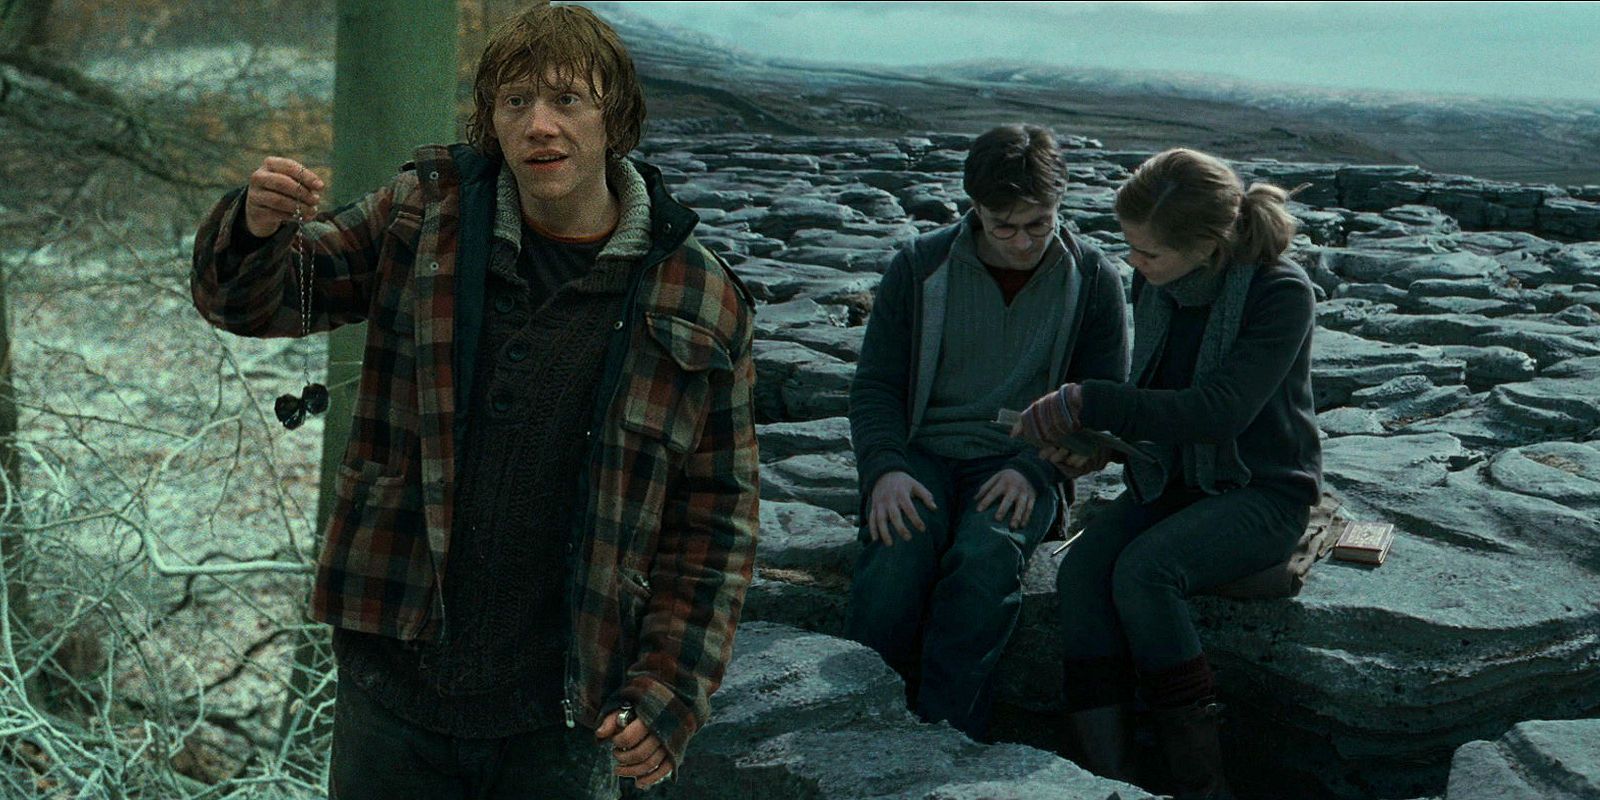 Ron in Harry Potter and the Deathly Hallows Part 1